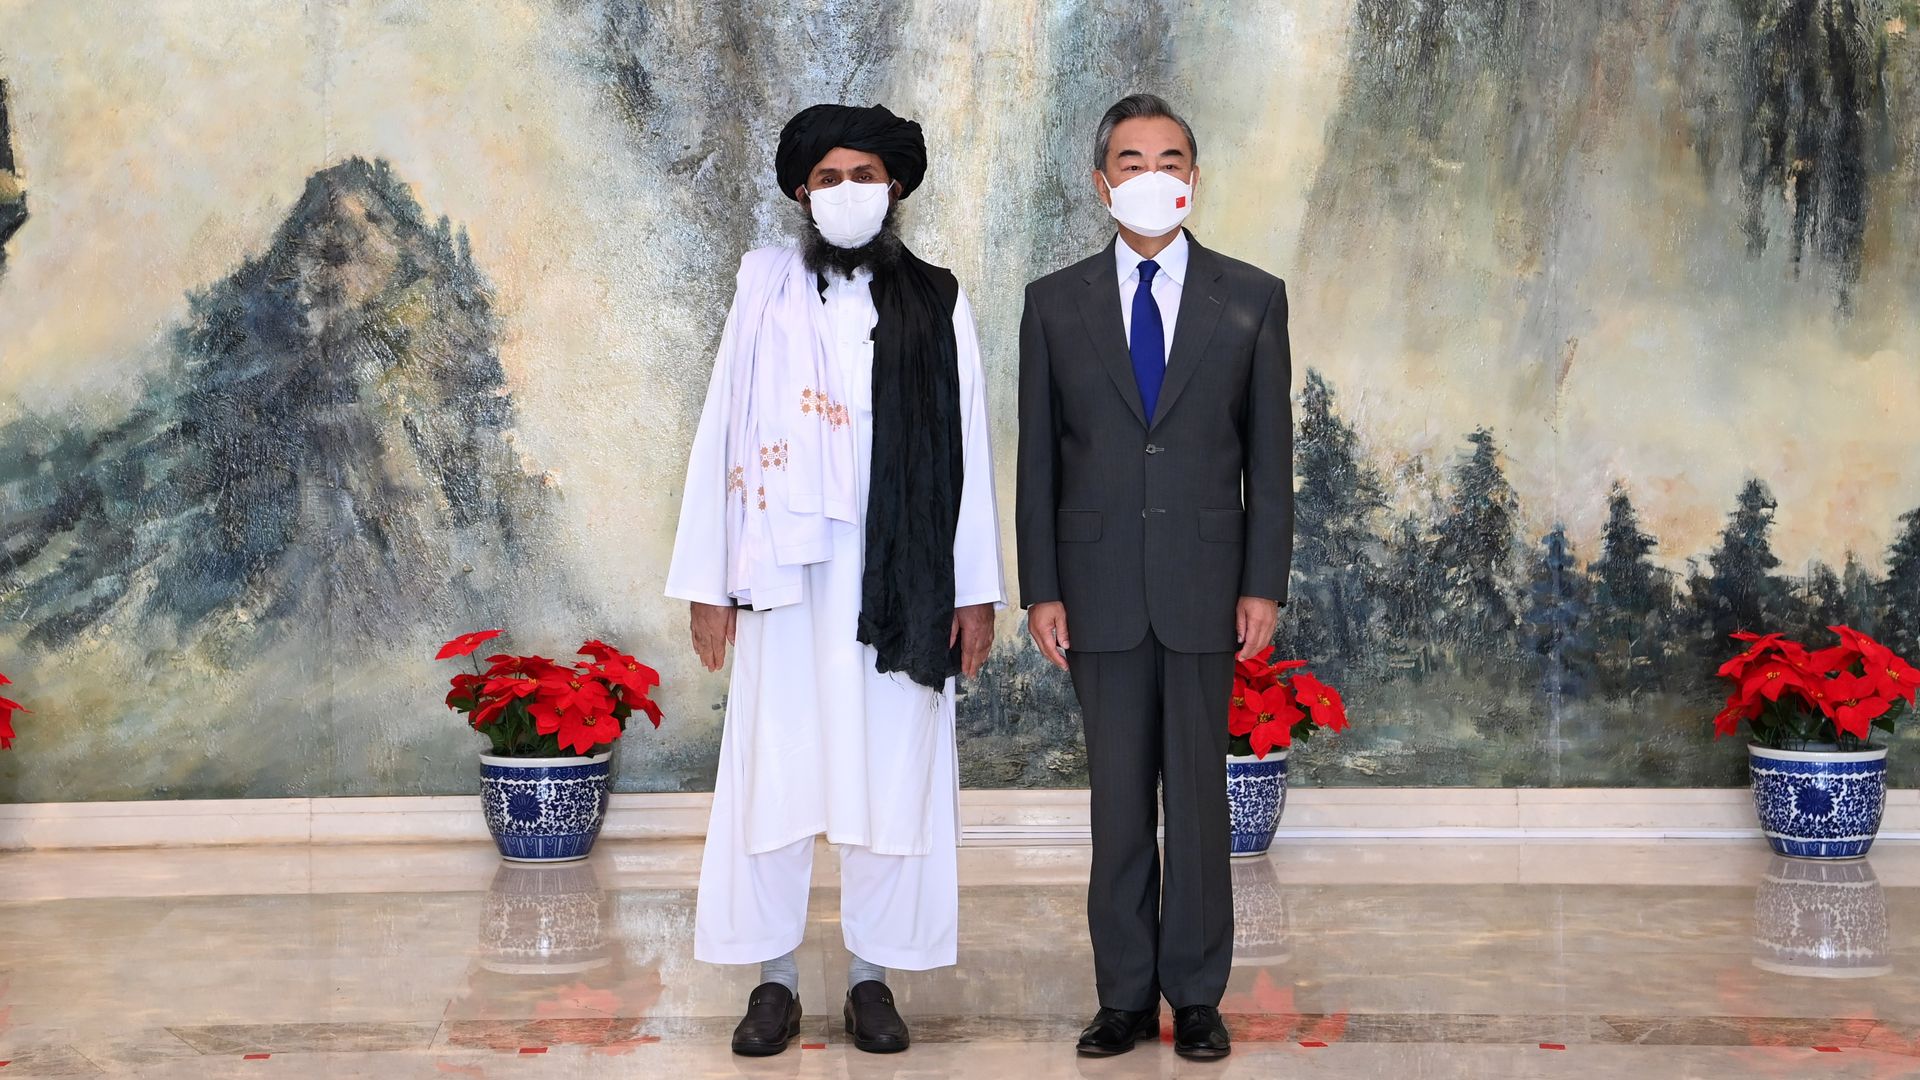 Chinese State Councilor and Foreign Minister Wang Yi meets with Mullah Abdul Ghani Baradar, political chief of Afghanistan's Taliban